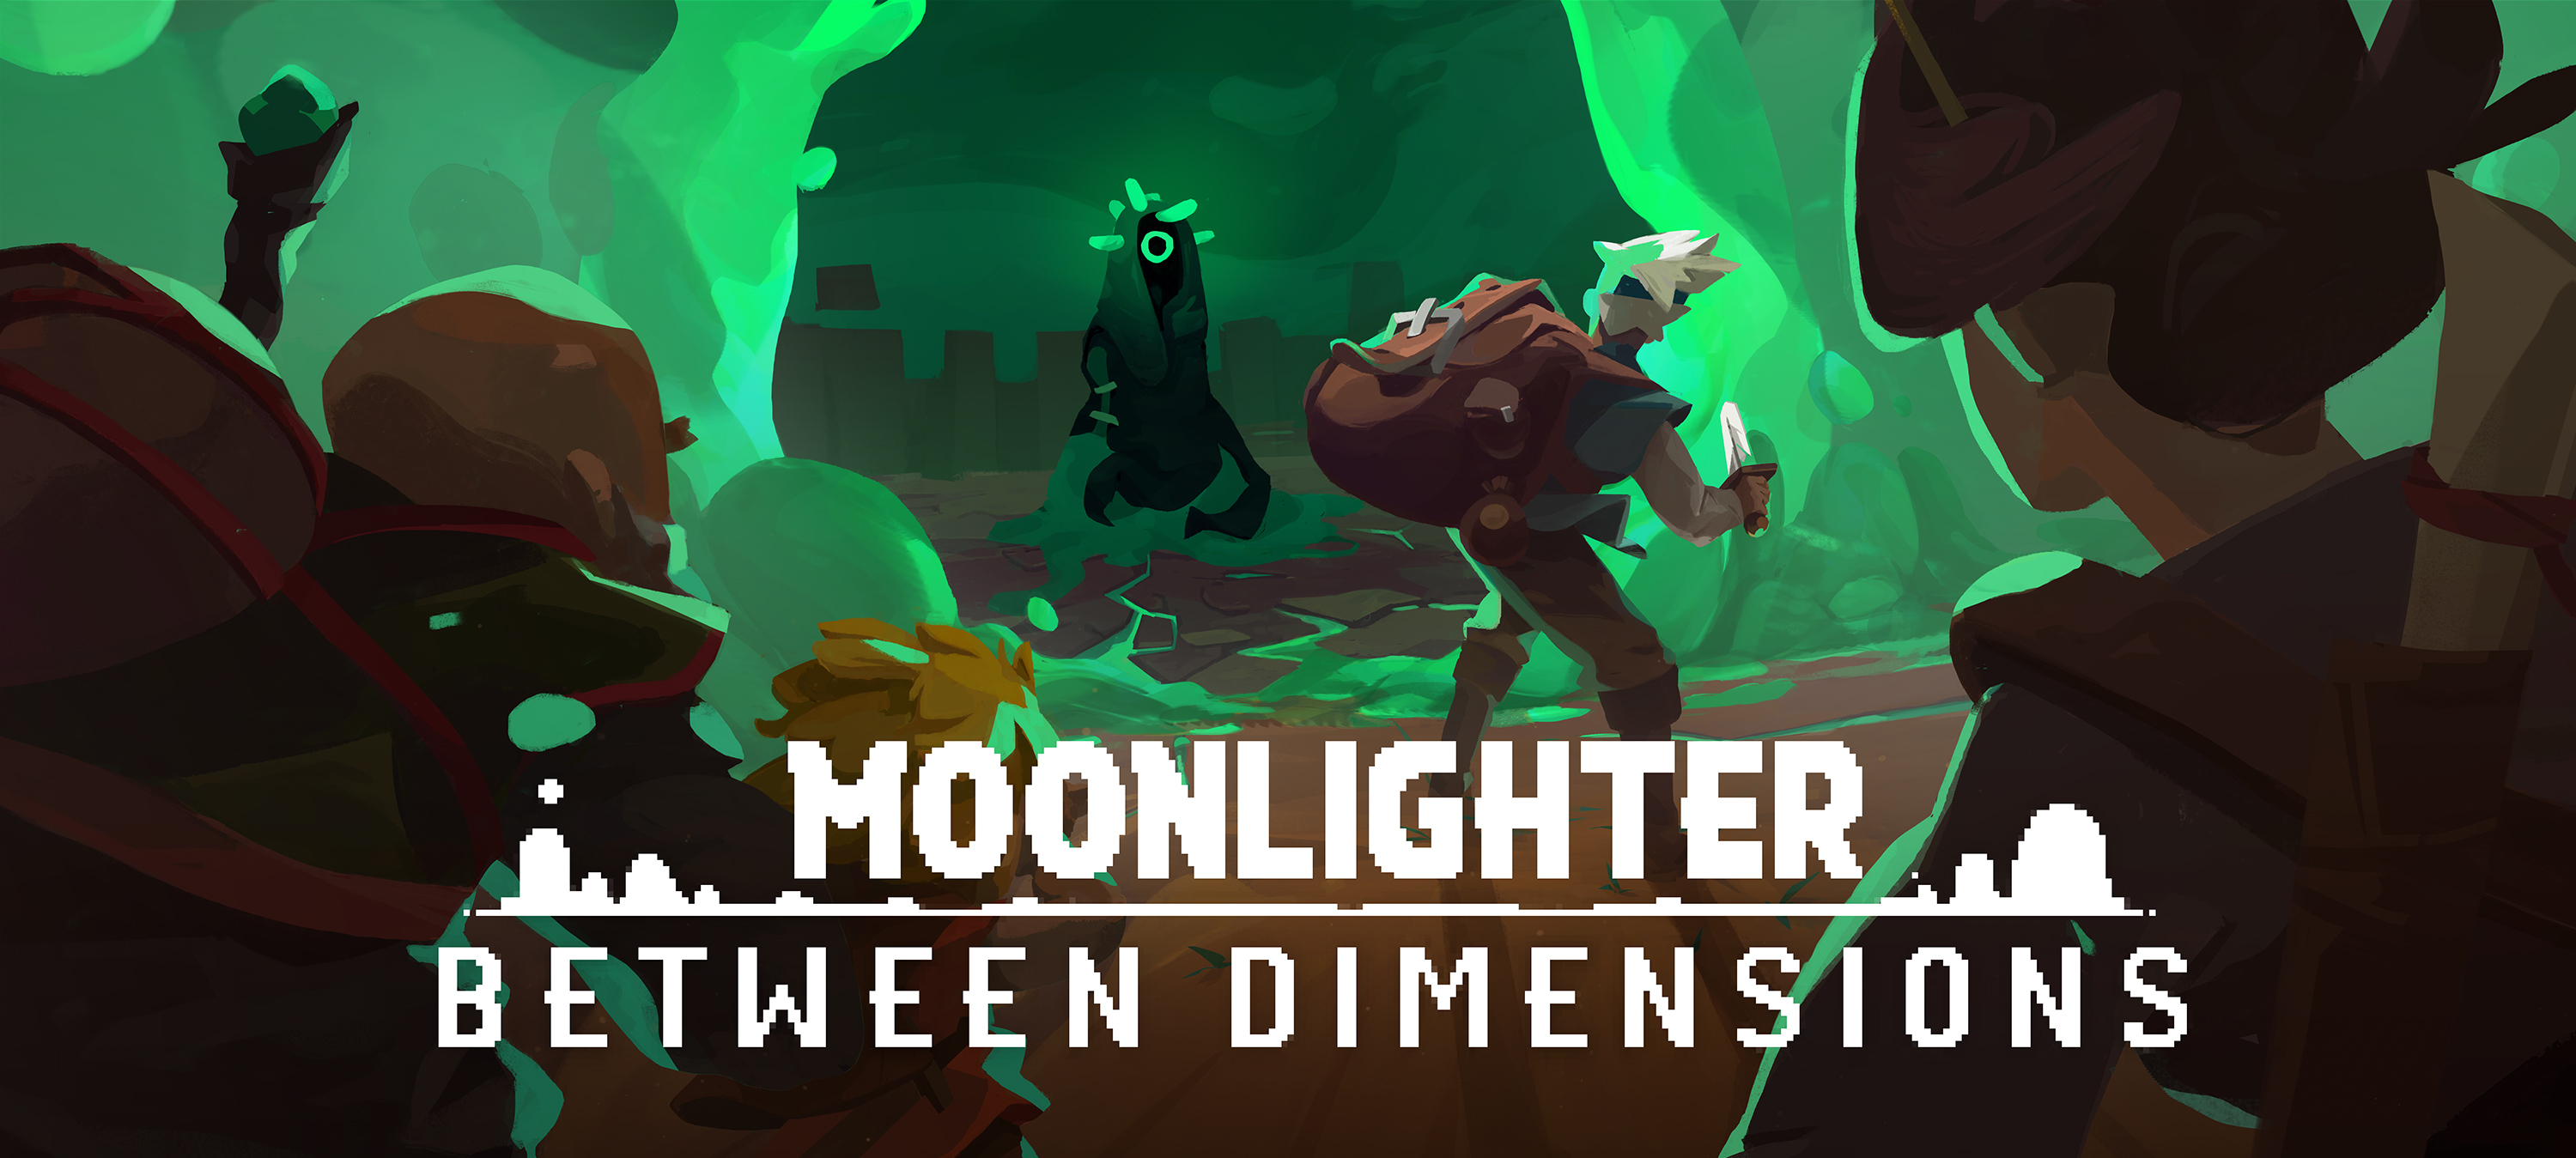 instal the new version for apple Moonlighter